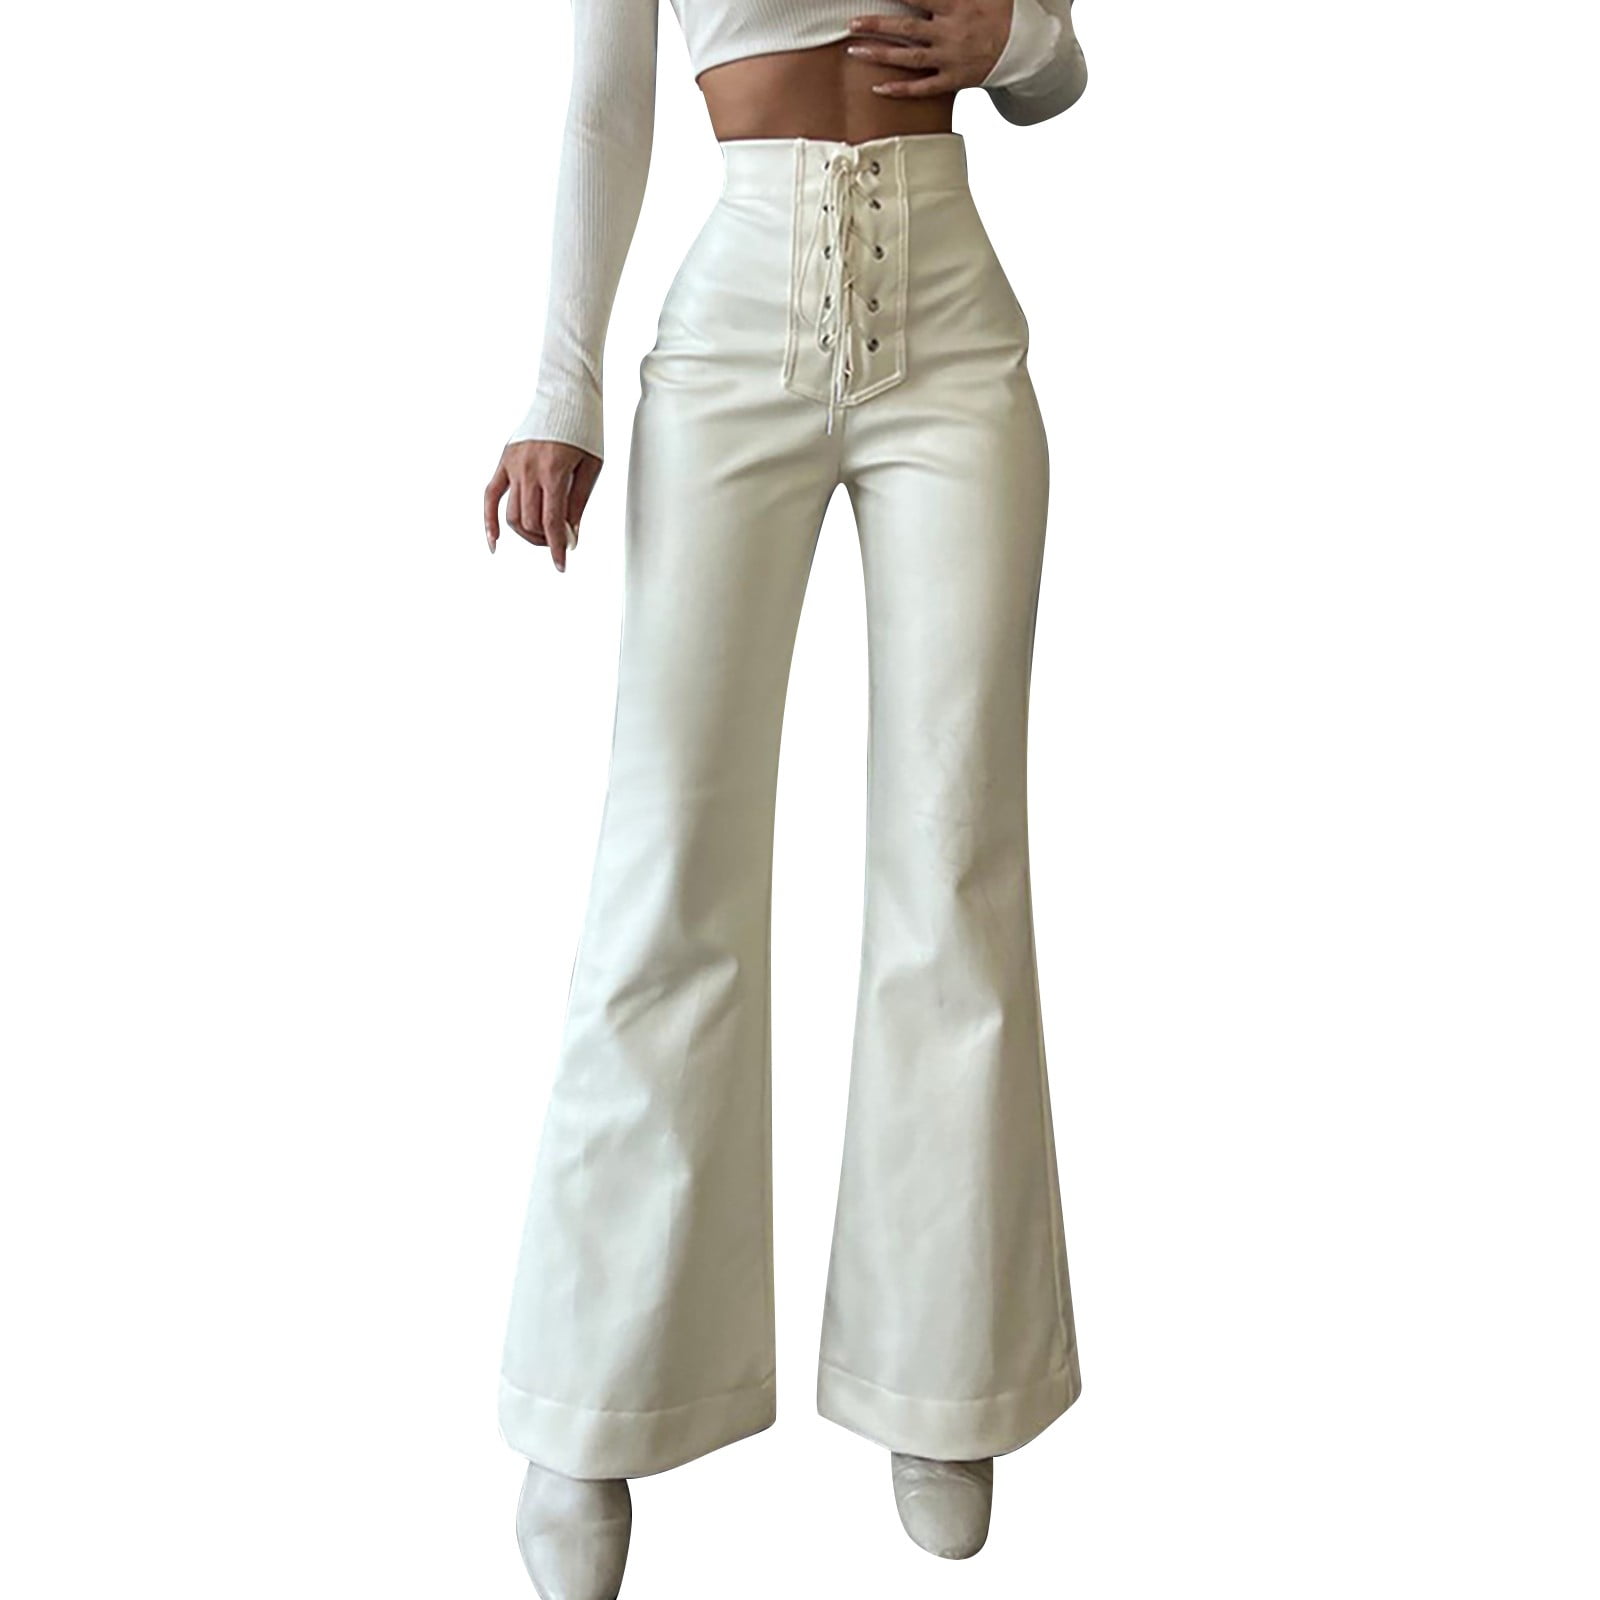 See and Be Seam High-Waisted Faux Leather Pants | Cream pants outfit,  Latest fashion clothes, White leather pants